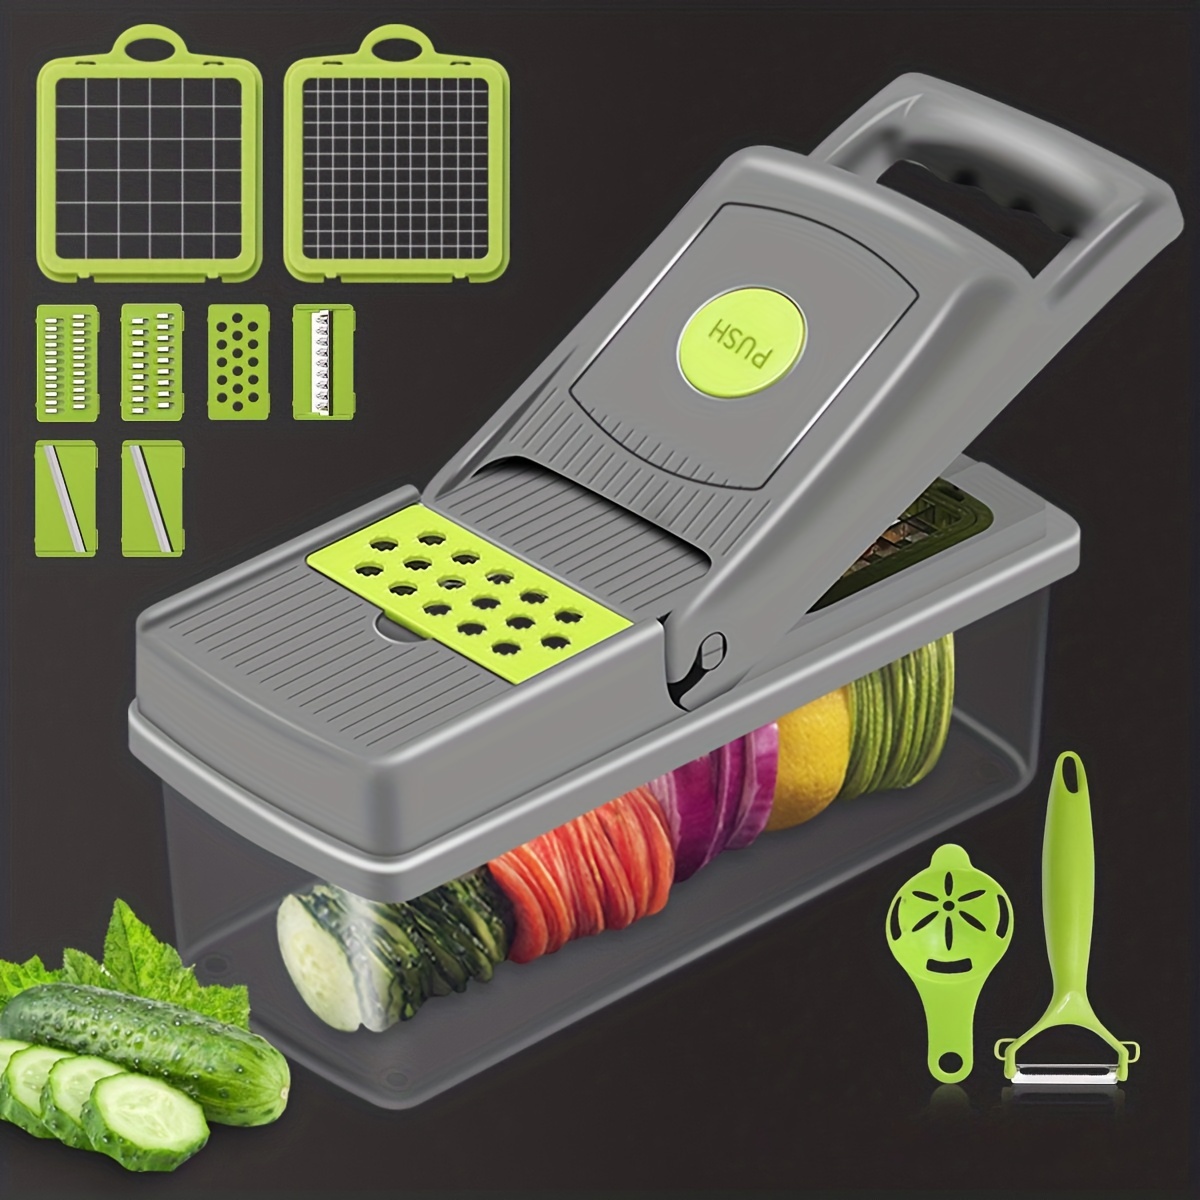 Chopper vegetable shredder onion cutter, CATEGORIES \ Kitchen \ Choppers  and slicers